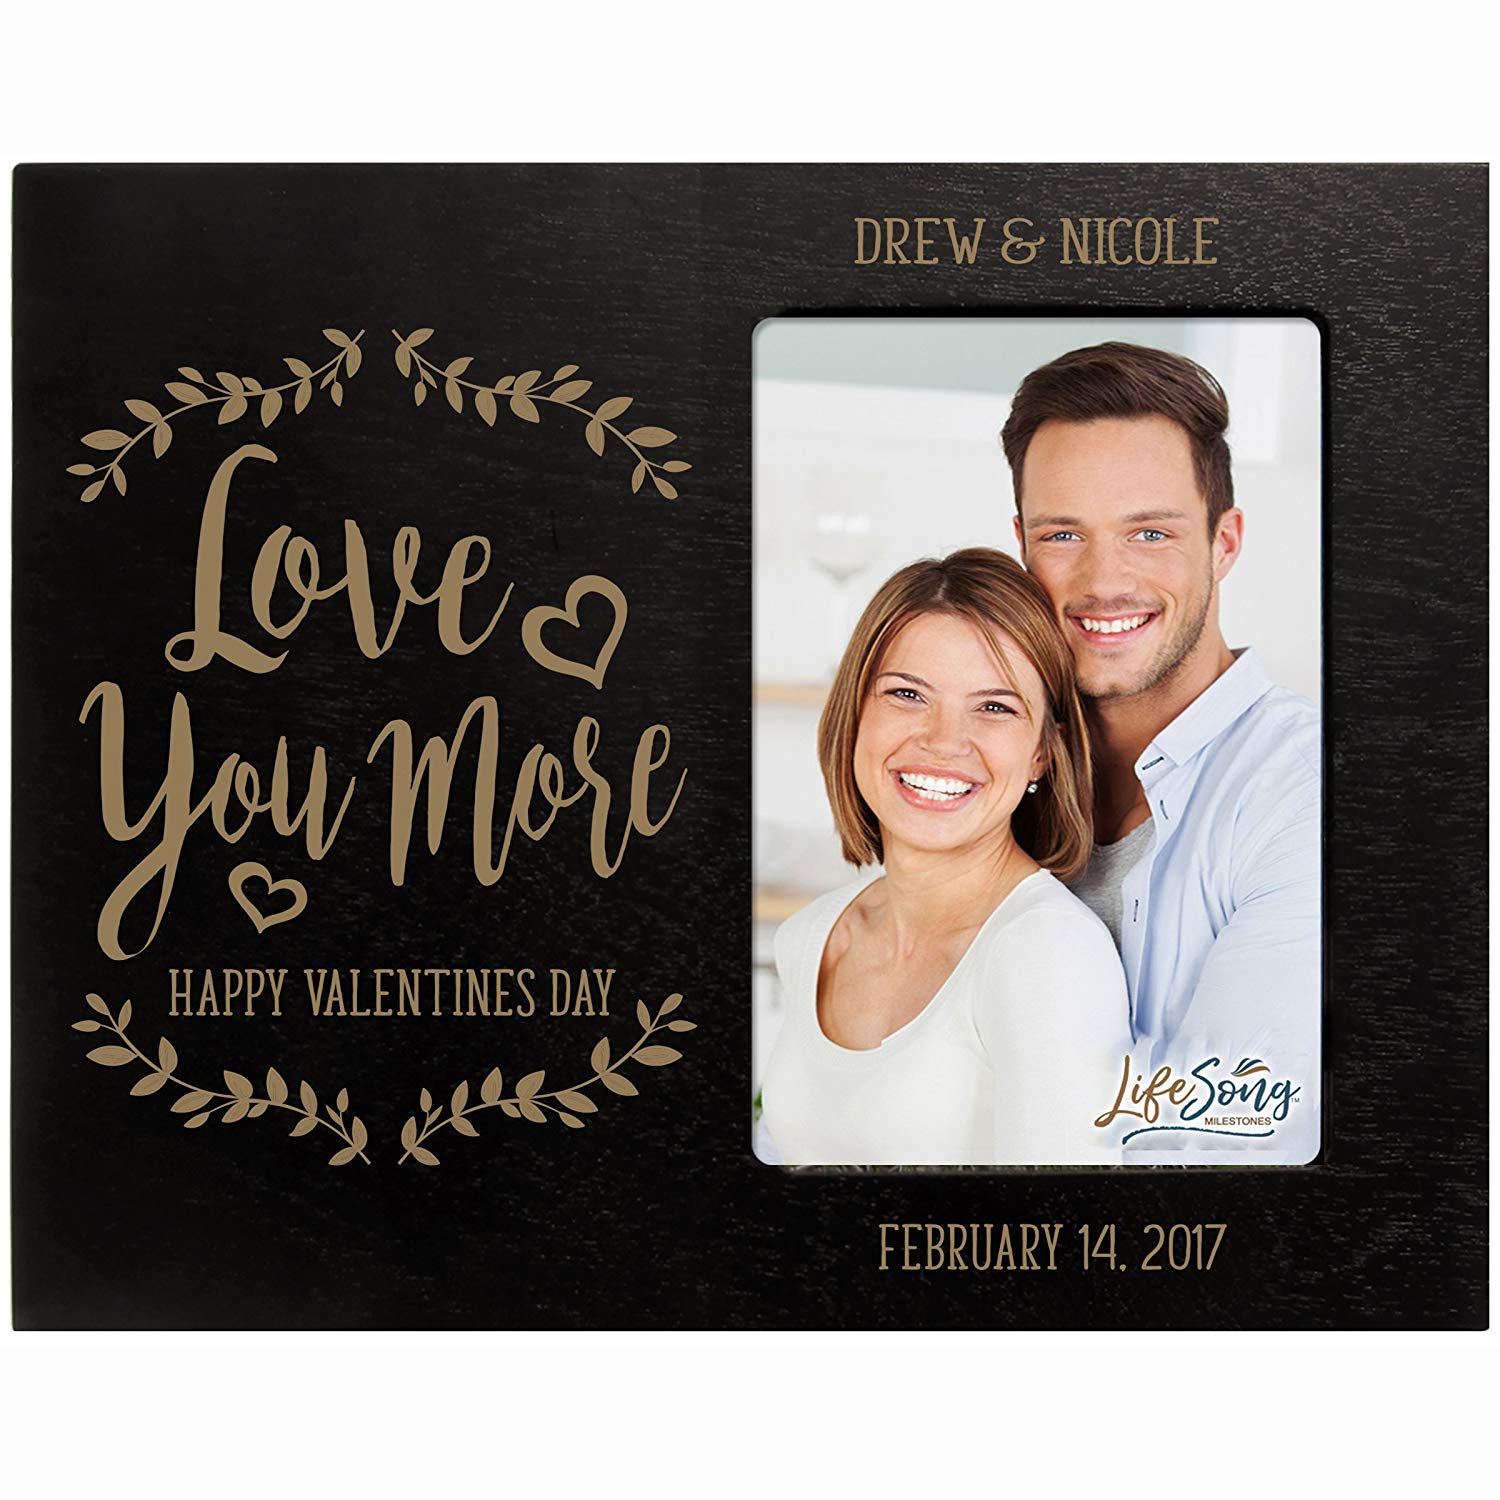 Personalized Valentine's Day Photo Frame - Love You More - LifeSong Milestones